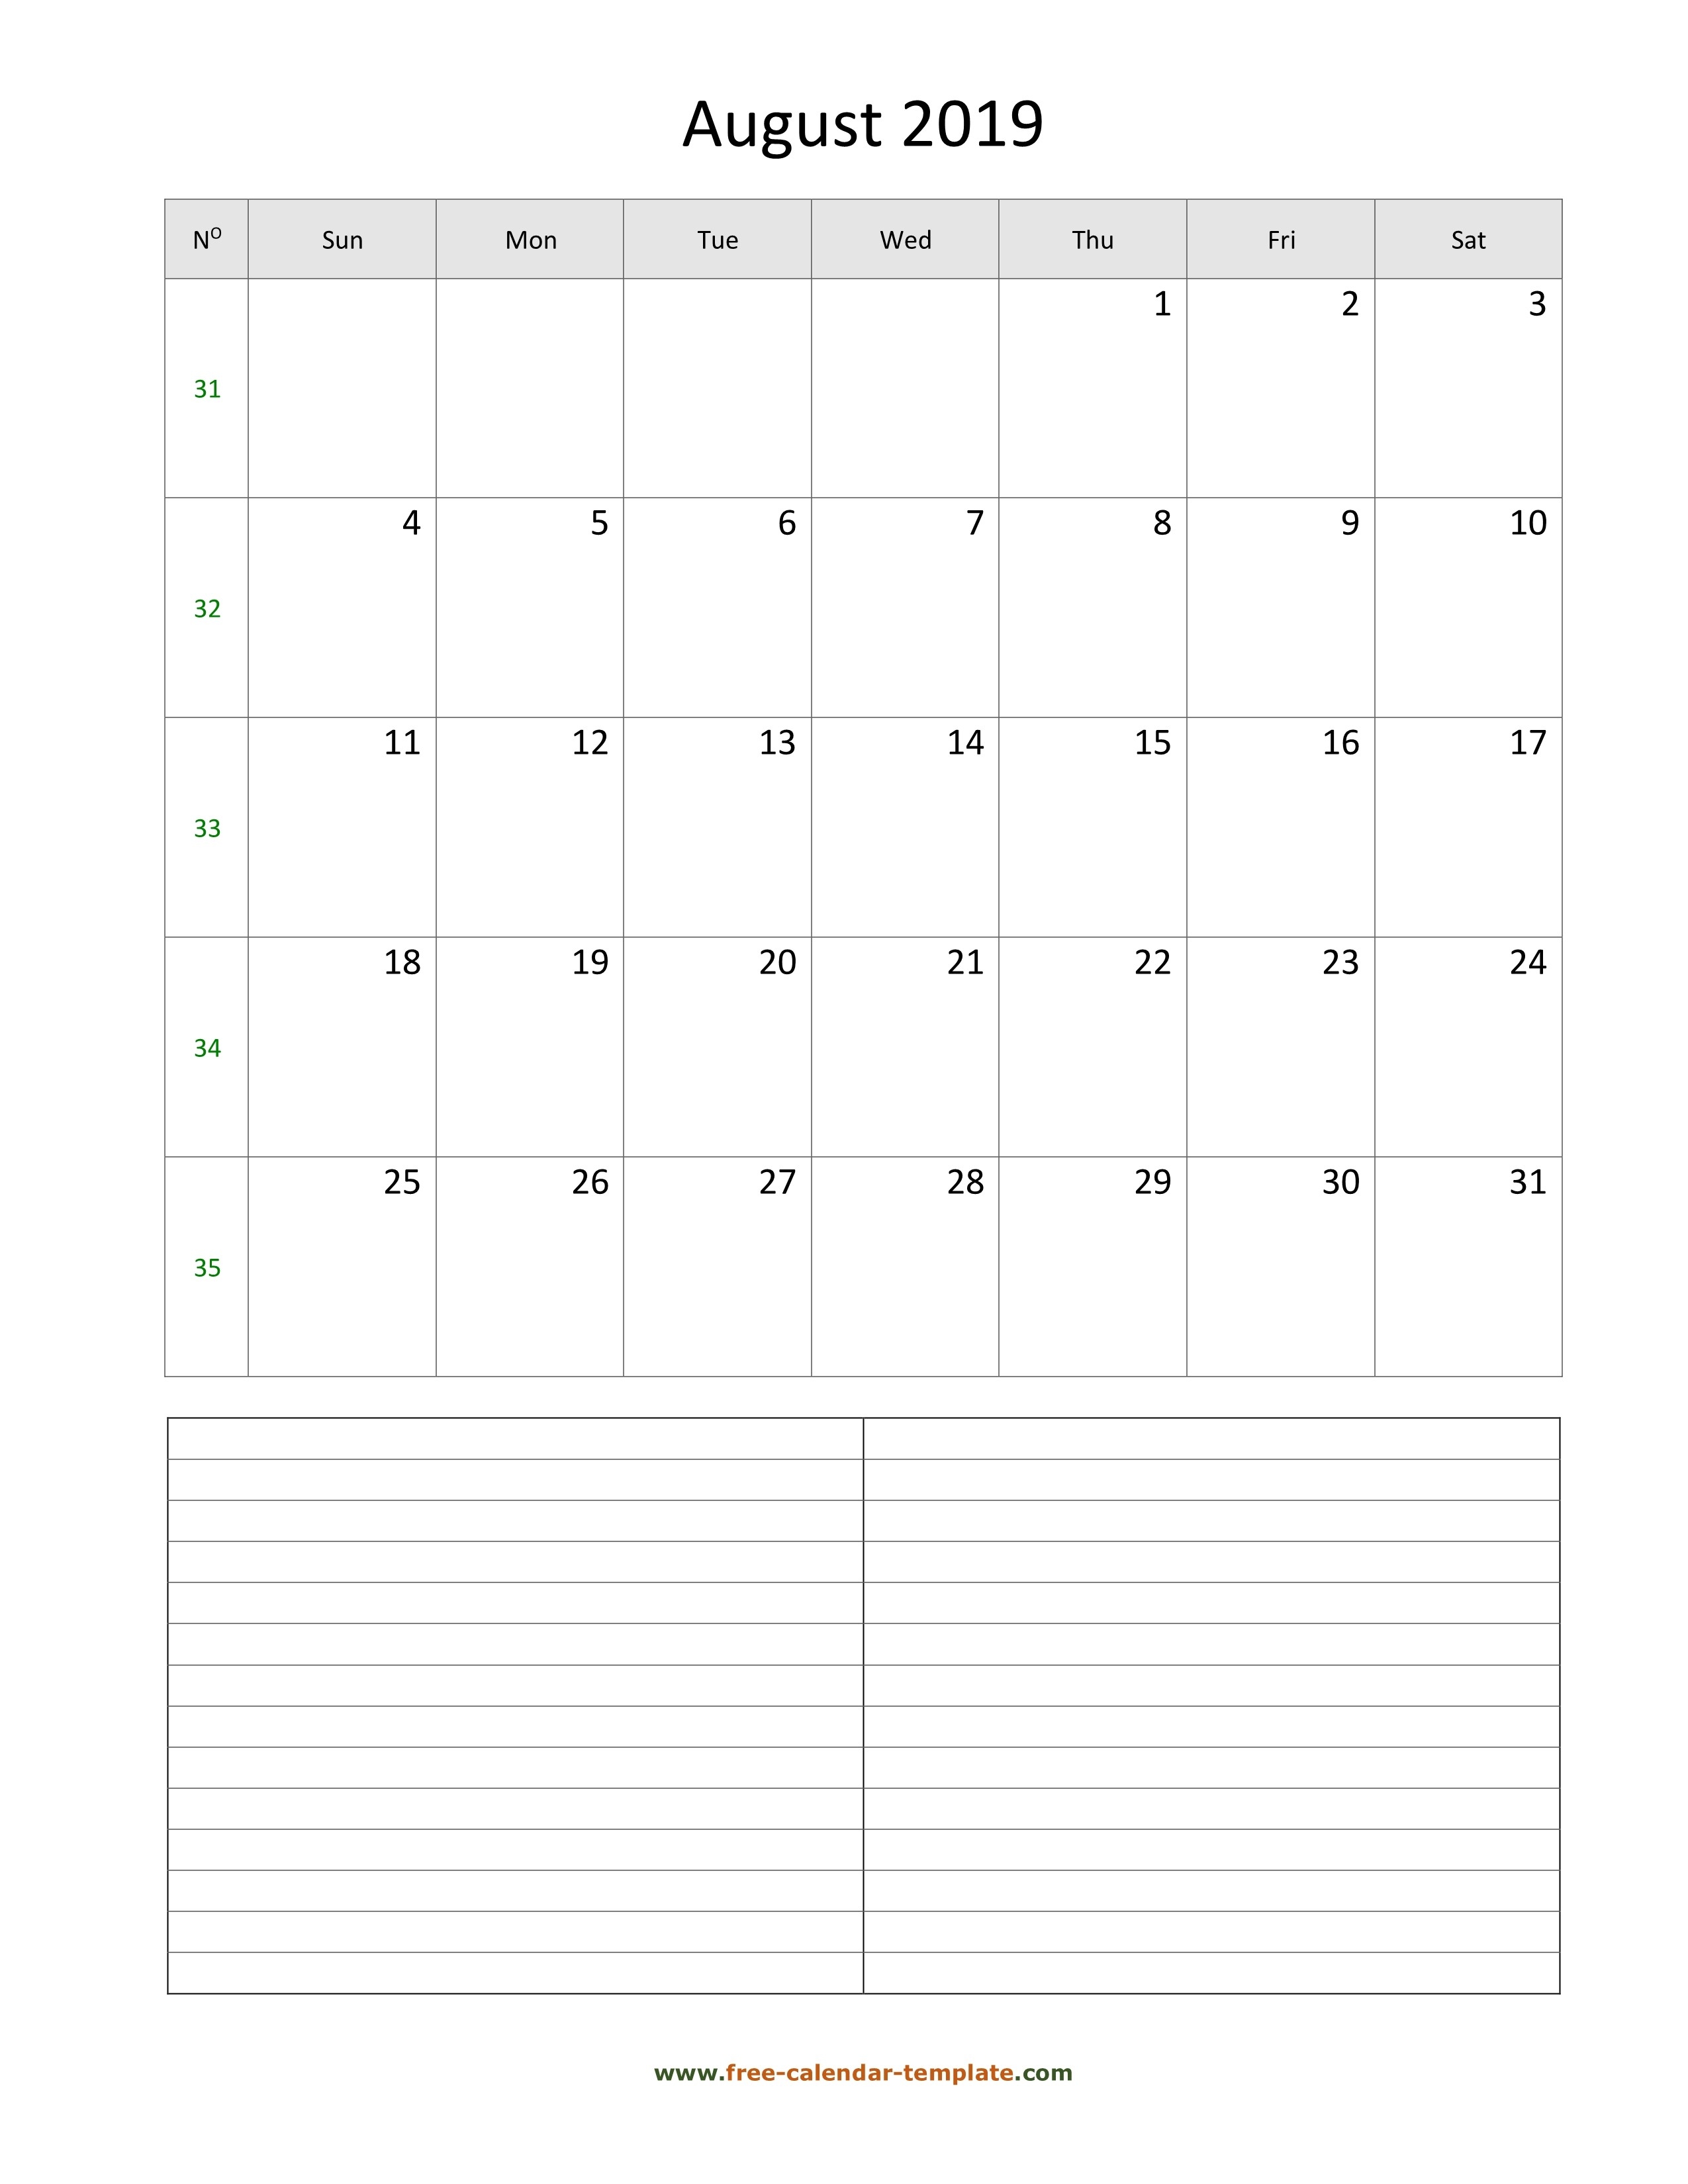 August 2019 Free Calendar Tempplate | Free-Calendar-Template-Free Blanks Calendar Printable With Notes And Lines